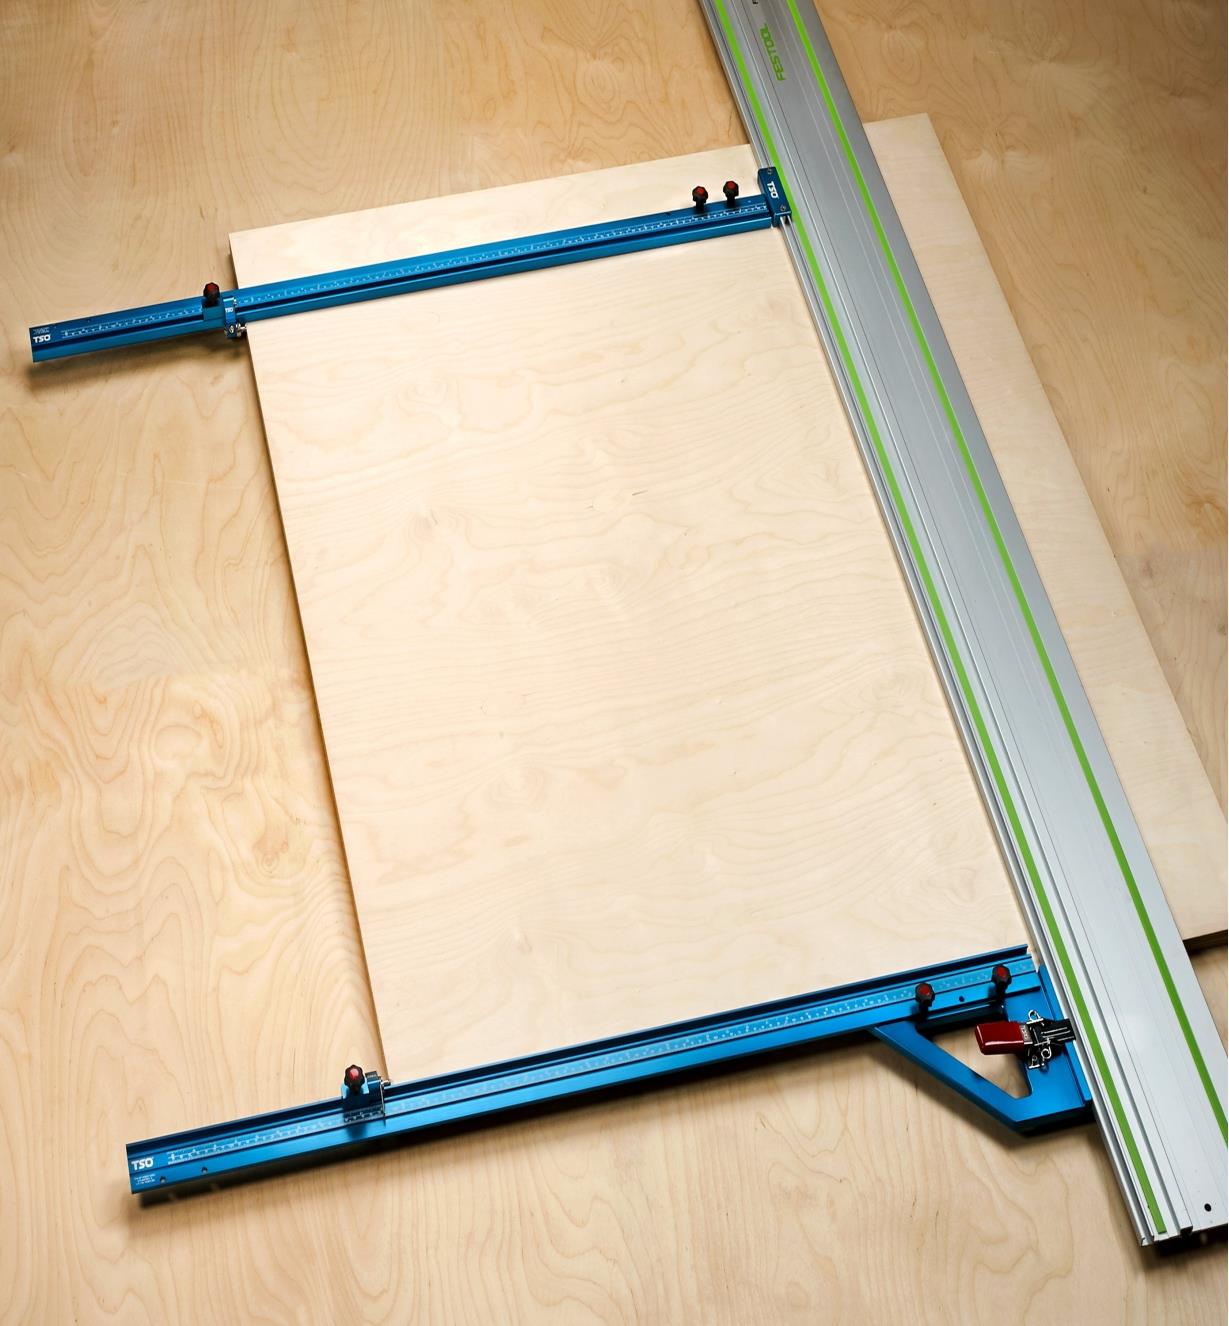 The TPG system mounted on a track-saw guide rail with a GRS-16 guide rail square and a TGP adapter